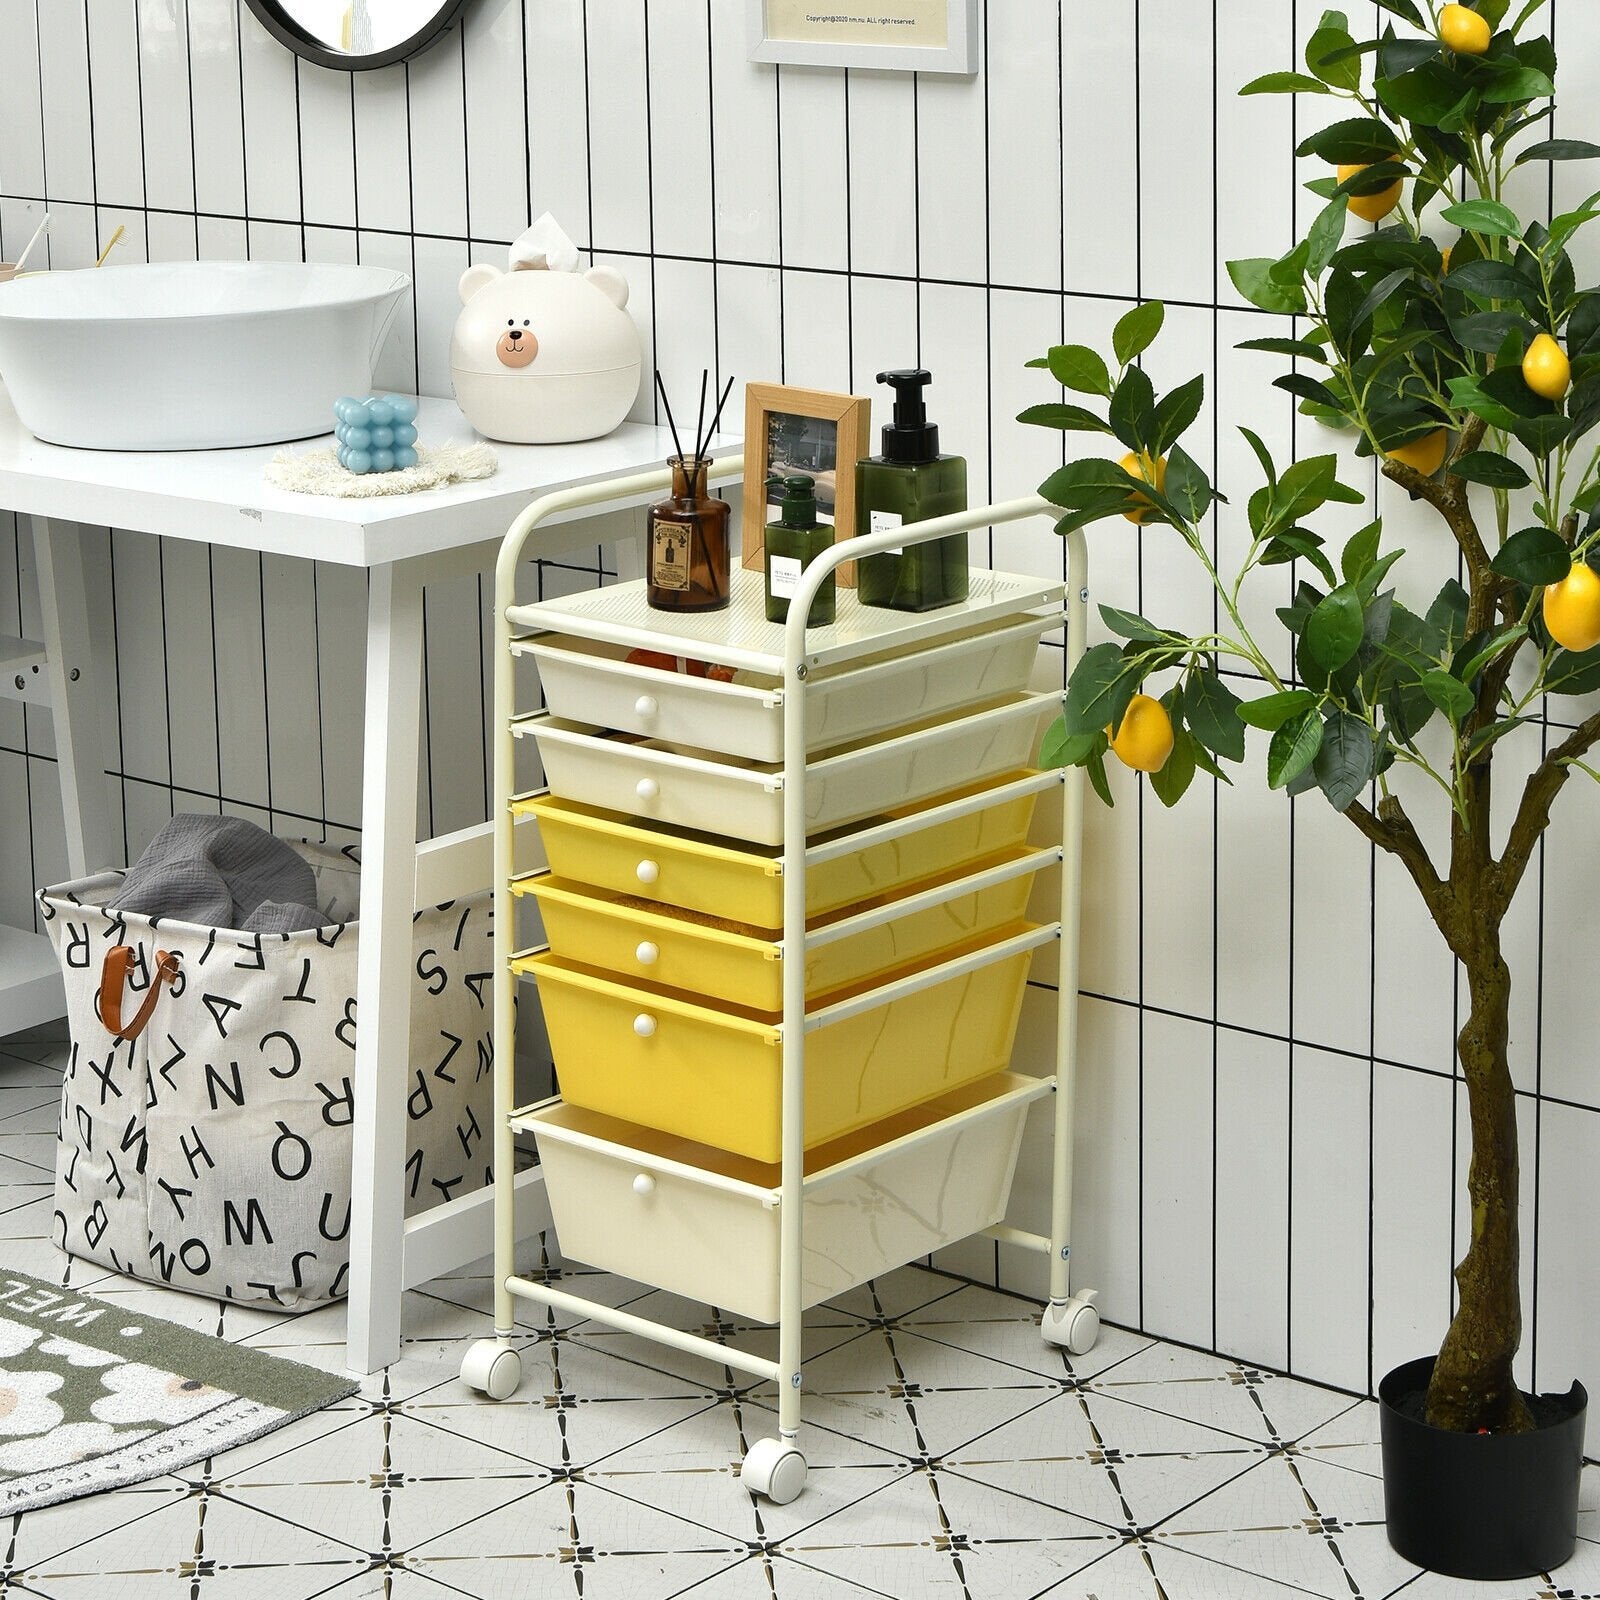 6 Drawers Rolling Storage Cart Organizer, Yellow at Gallery Canada